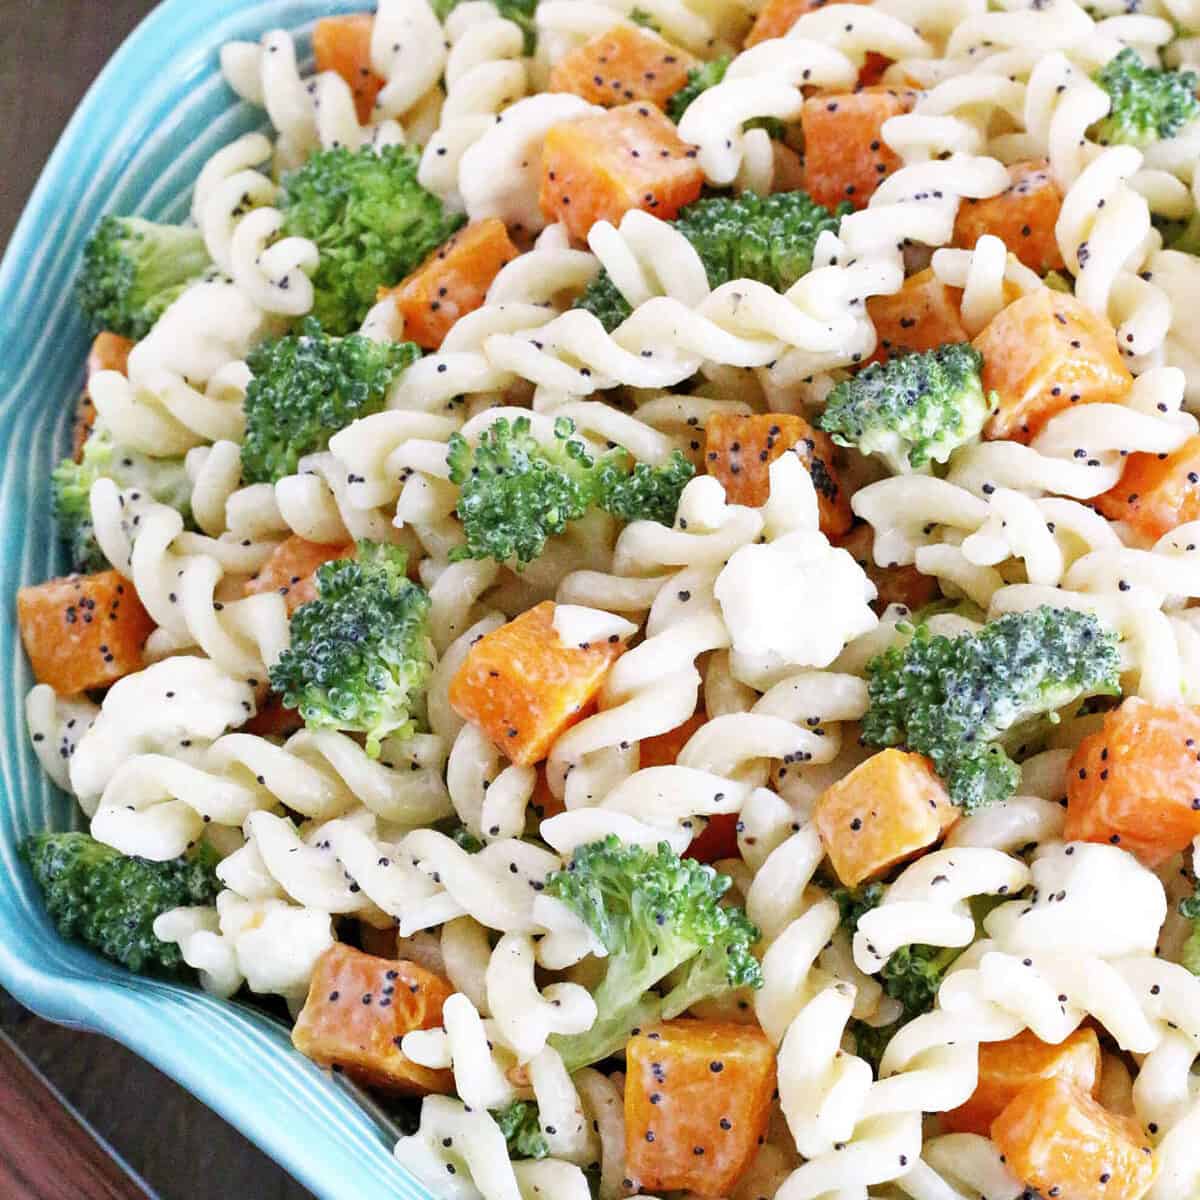 This make-ahead and crowd-pleasing Butternut Squash Pasta Recipe is ideal for Thanksgiving, and features the perfect fall flavors that everyone will love!